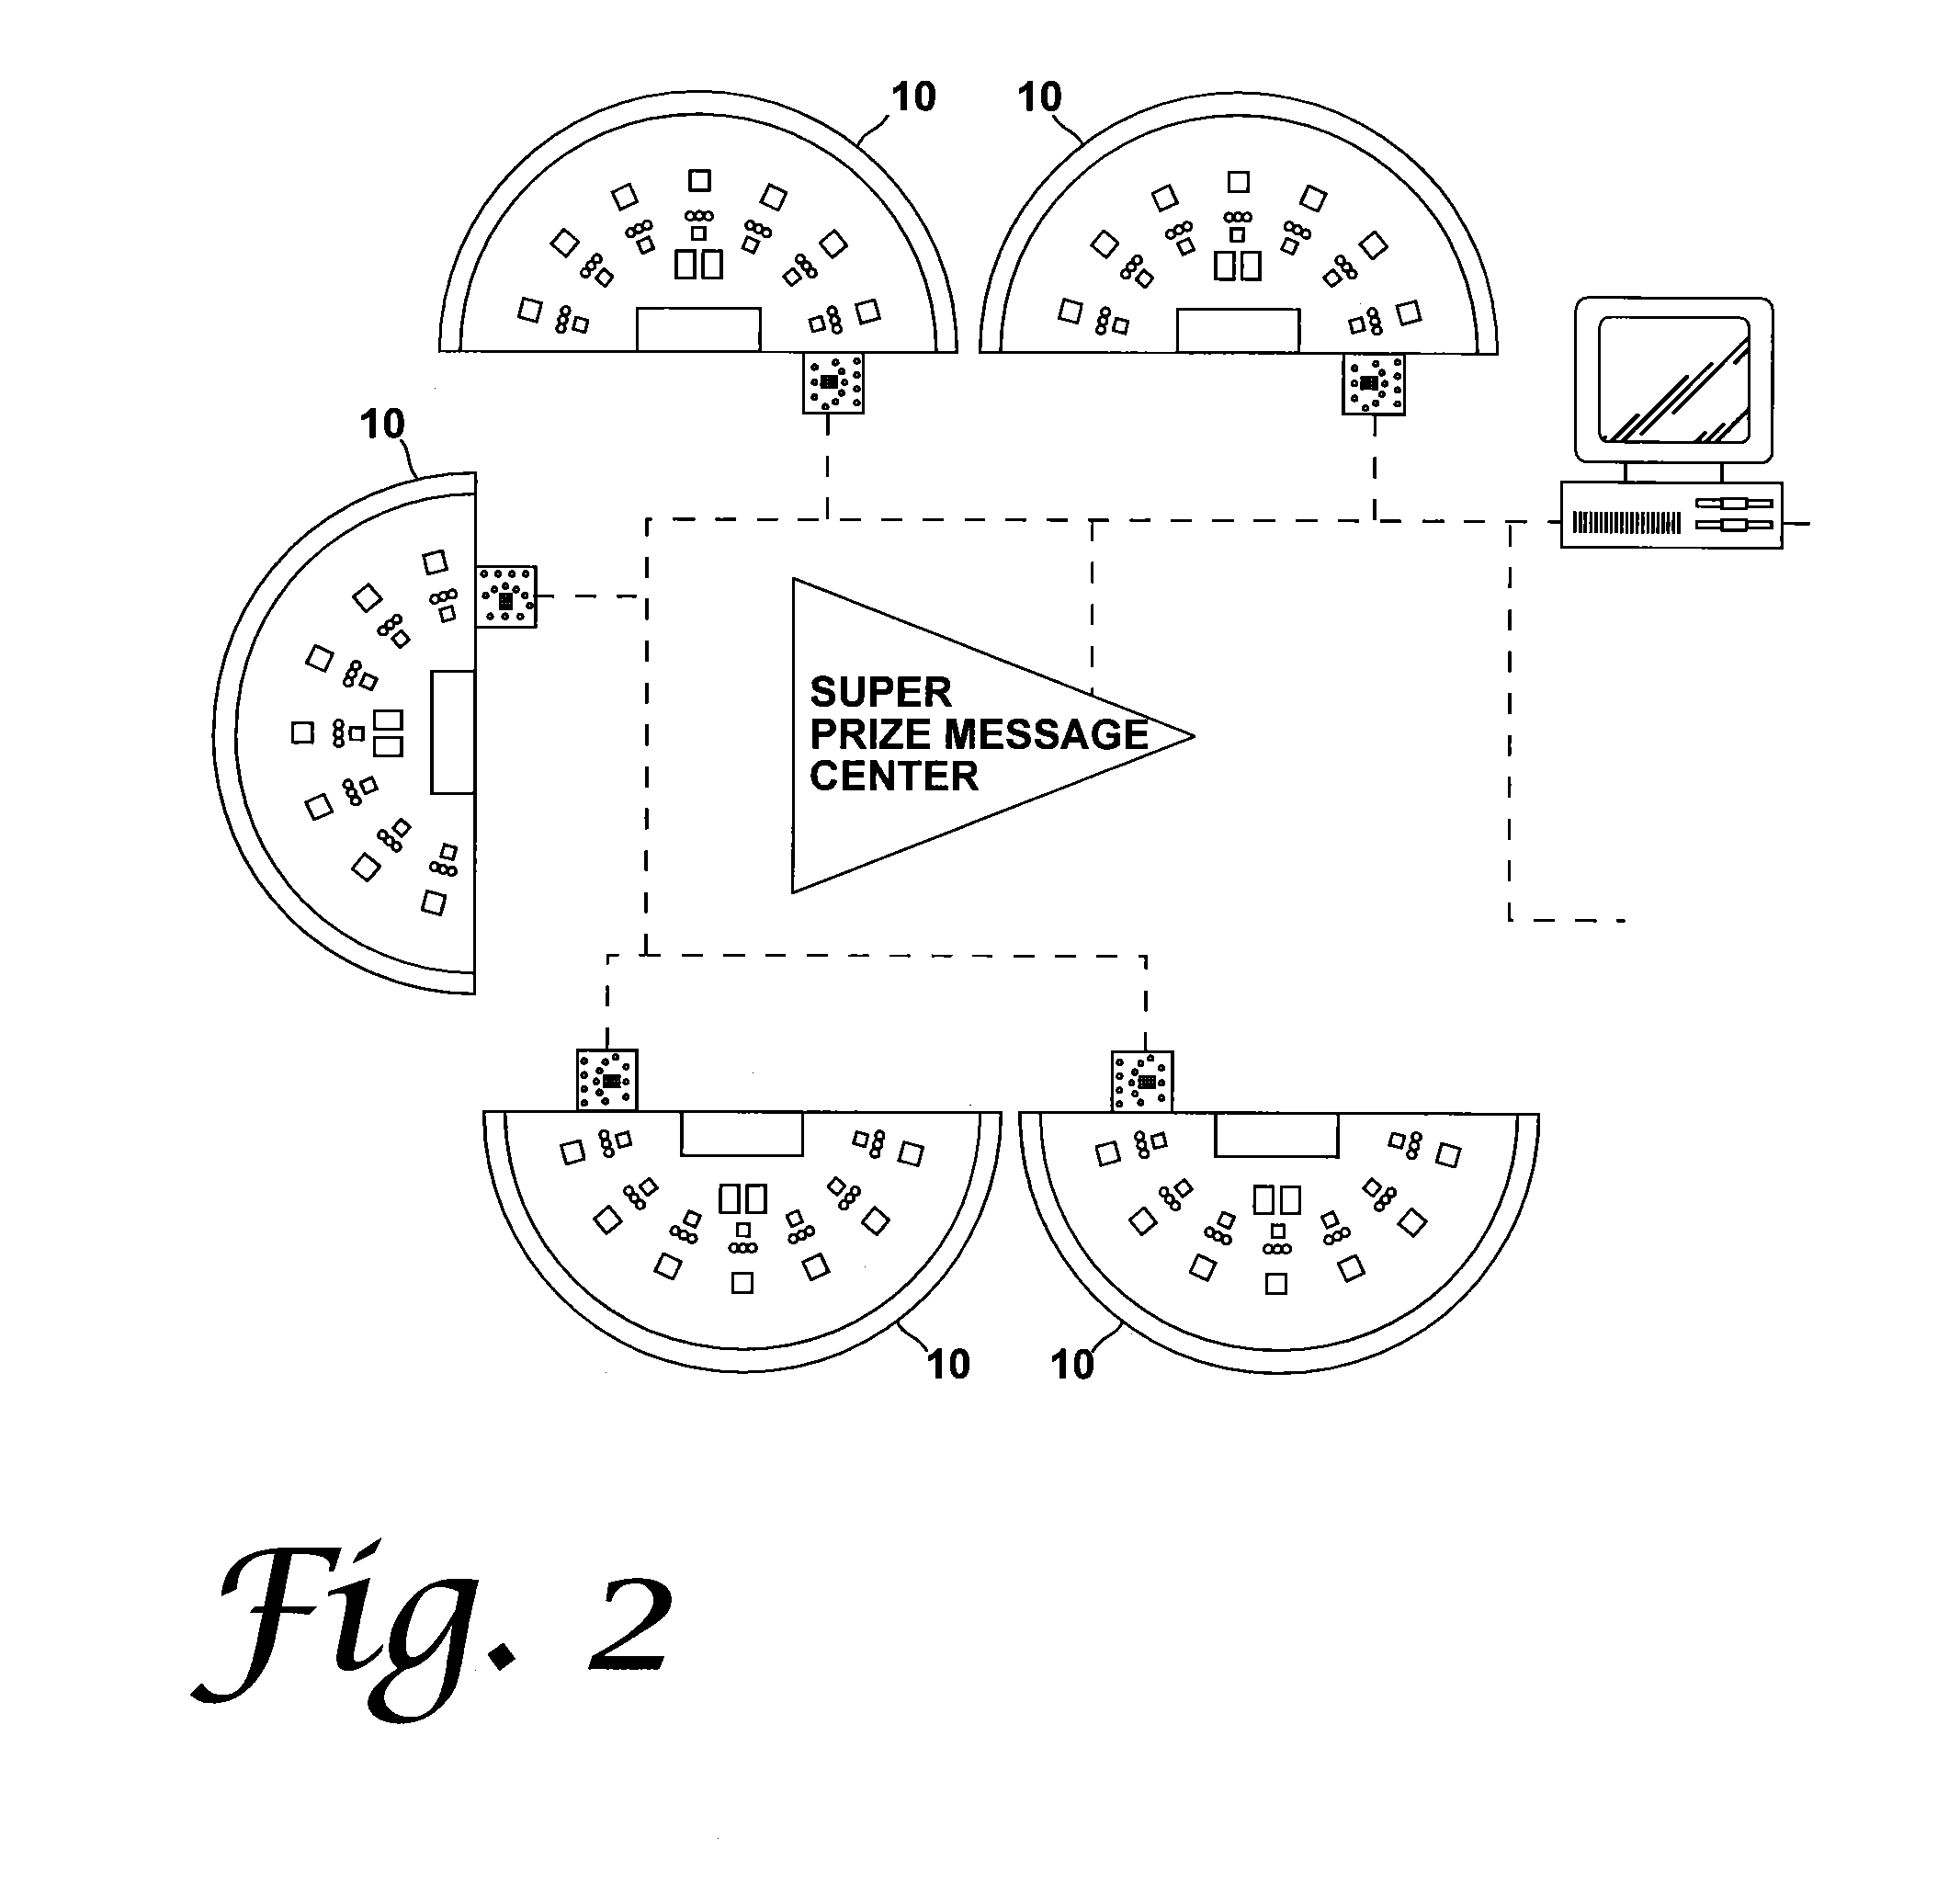 Method and apparatus for using upstream communication in a card shuffler